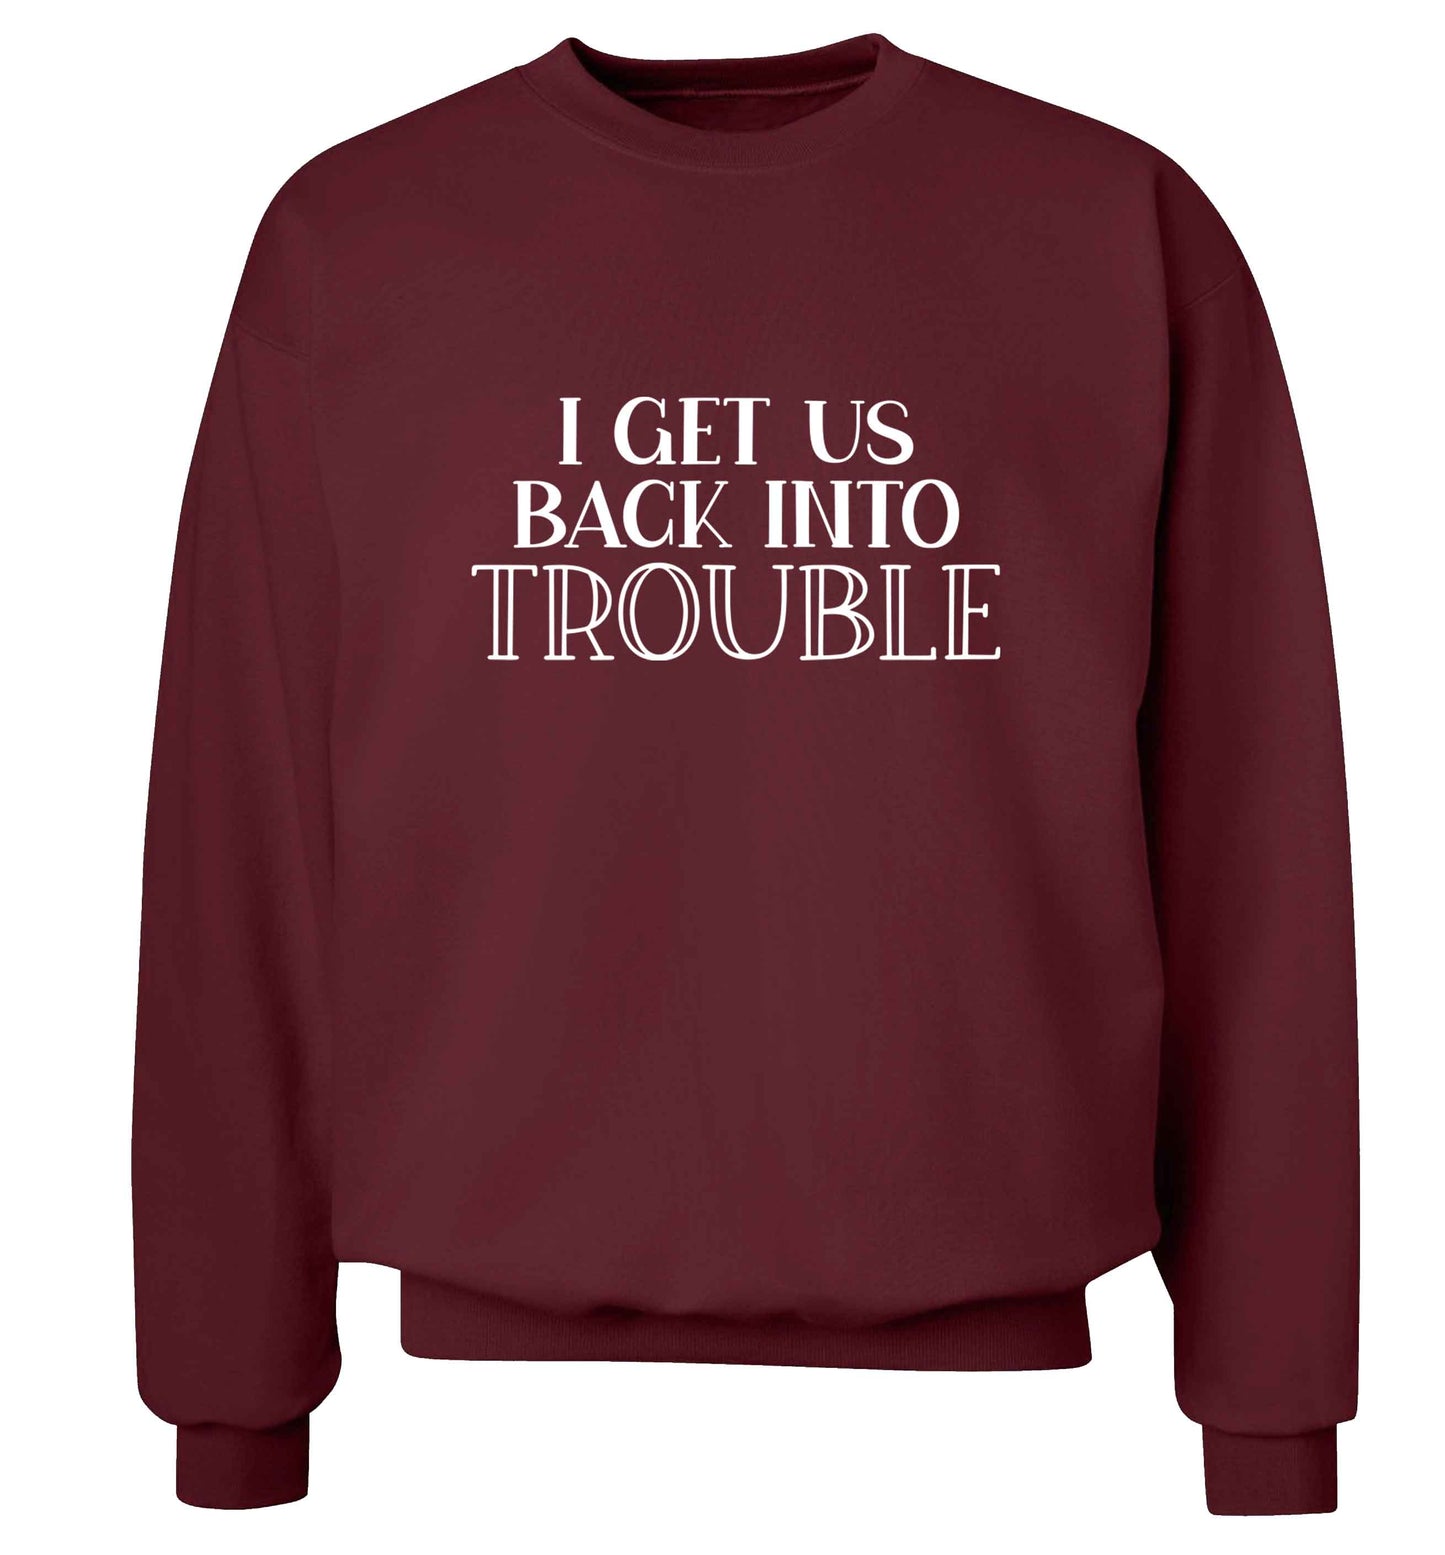 I get us back into trouble adult's unisex maroon sweater 2XL